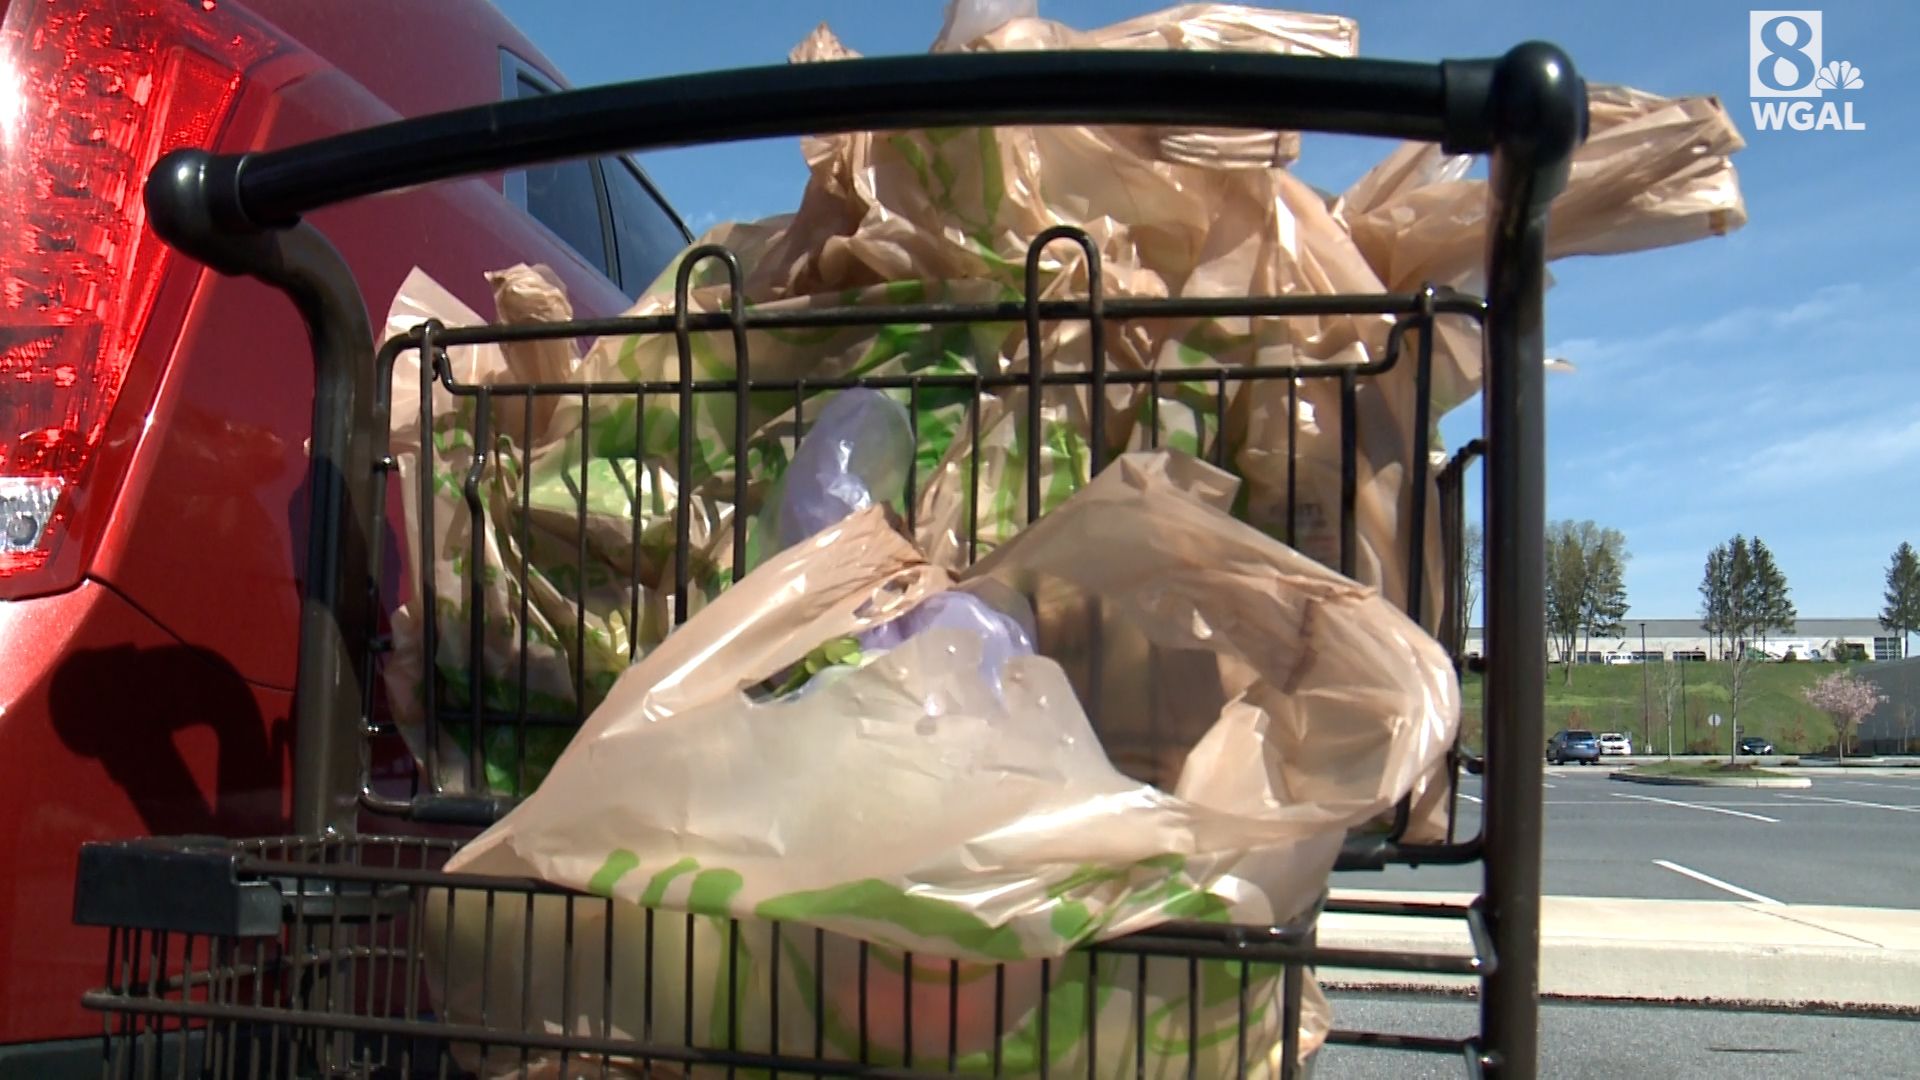 How Wegmans' curbside pick-up will be affected by plastic bag ban